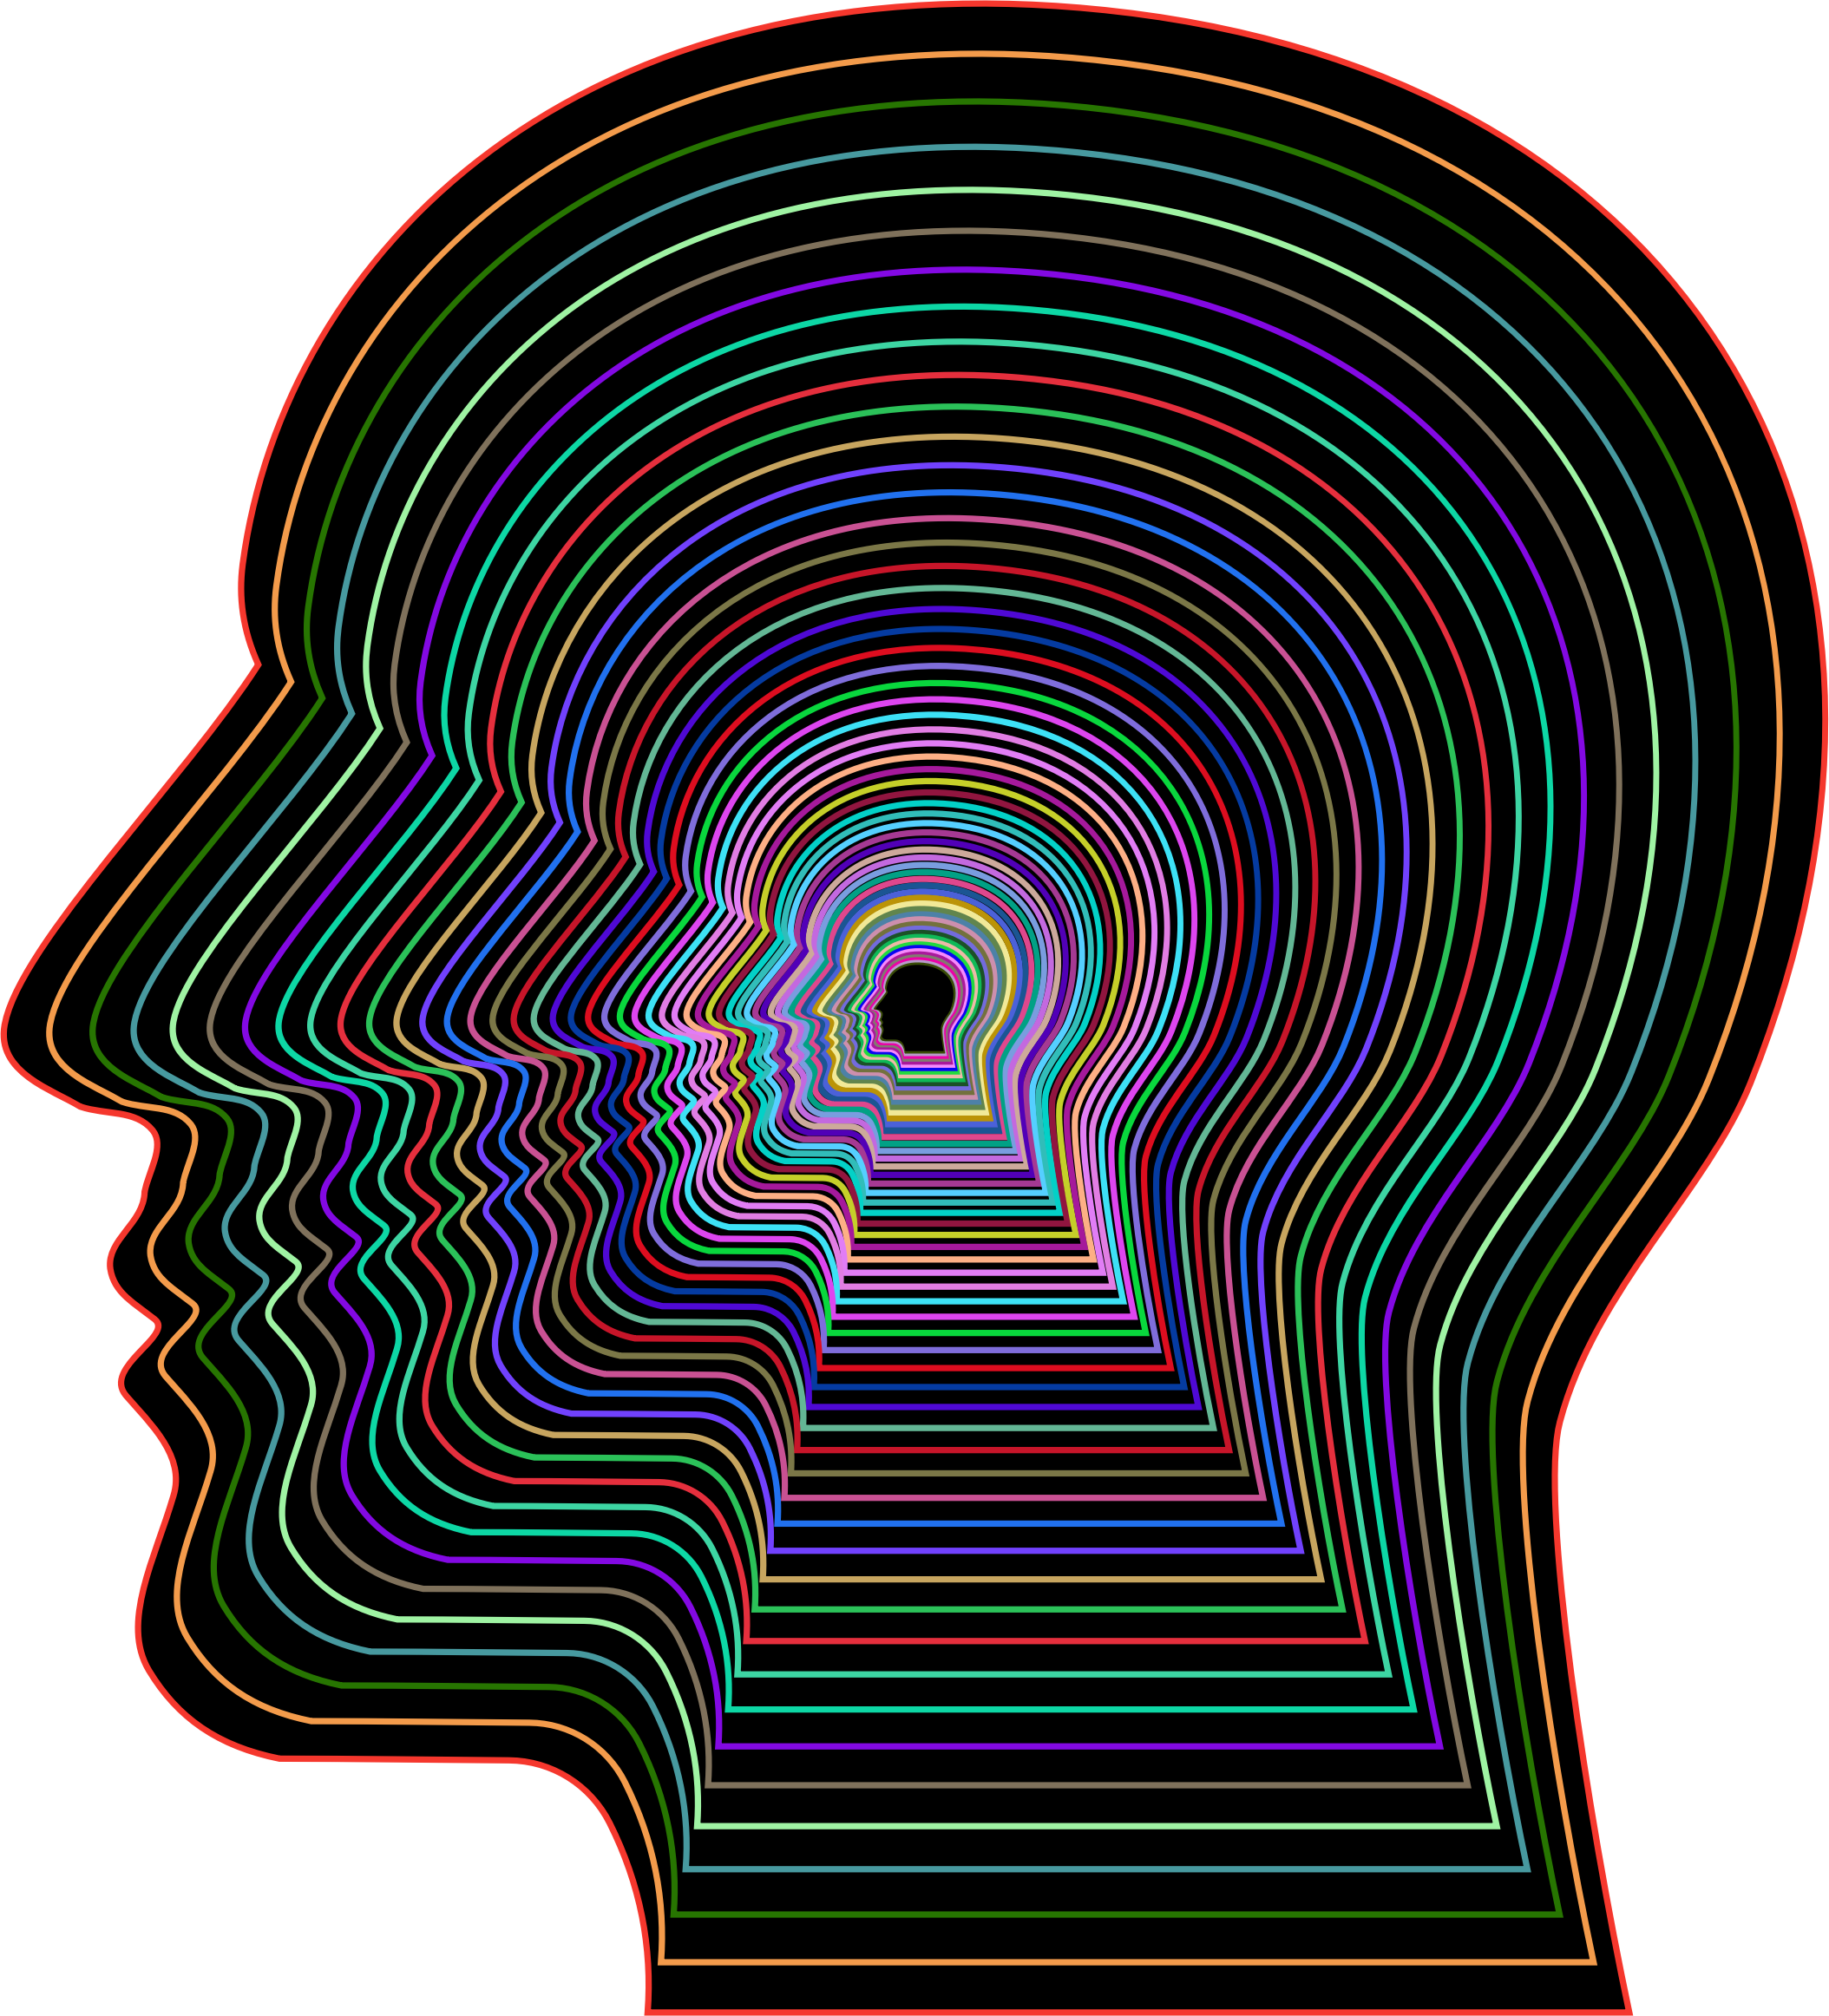 Big Image - Head Outline Without Background (2108x2324)